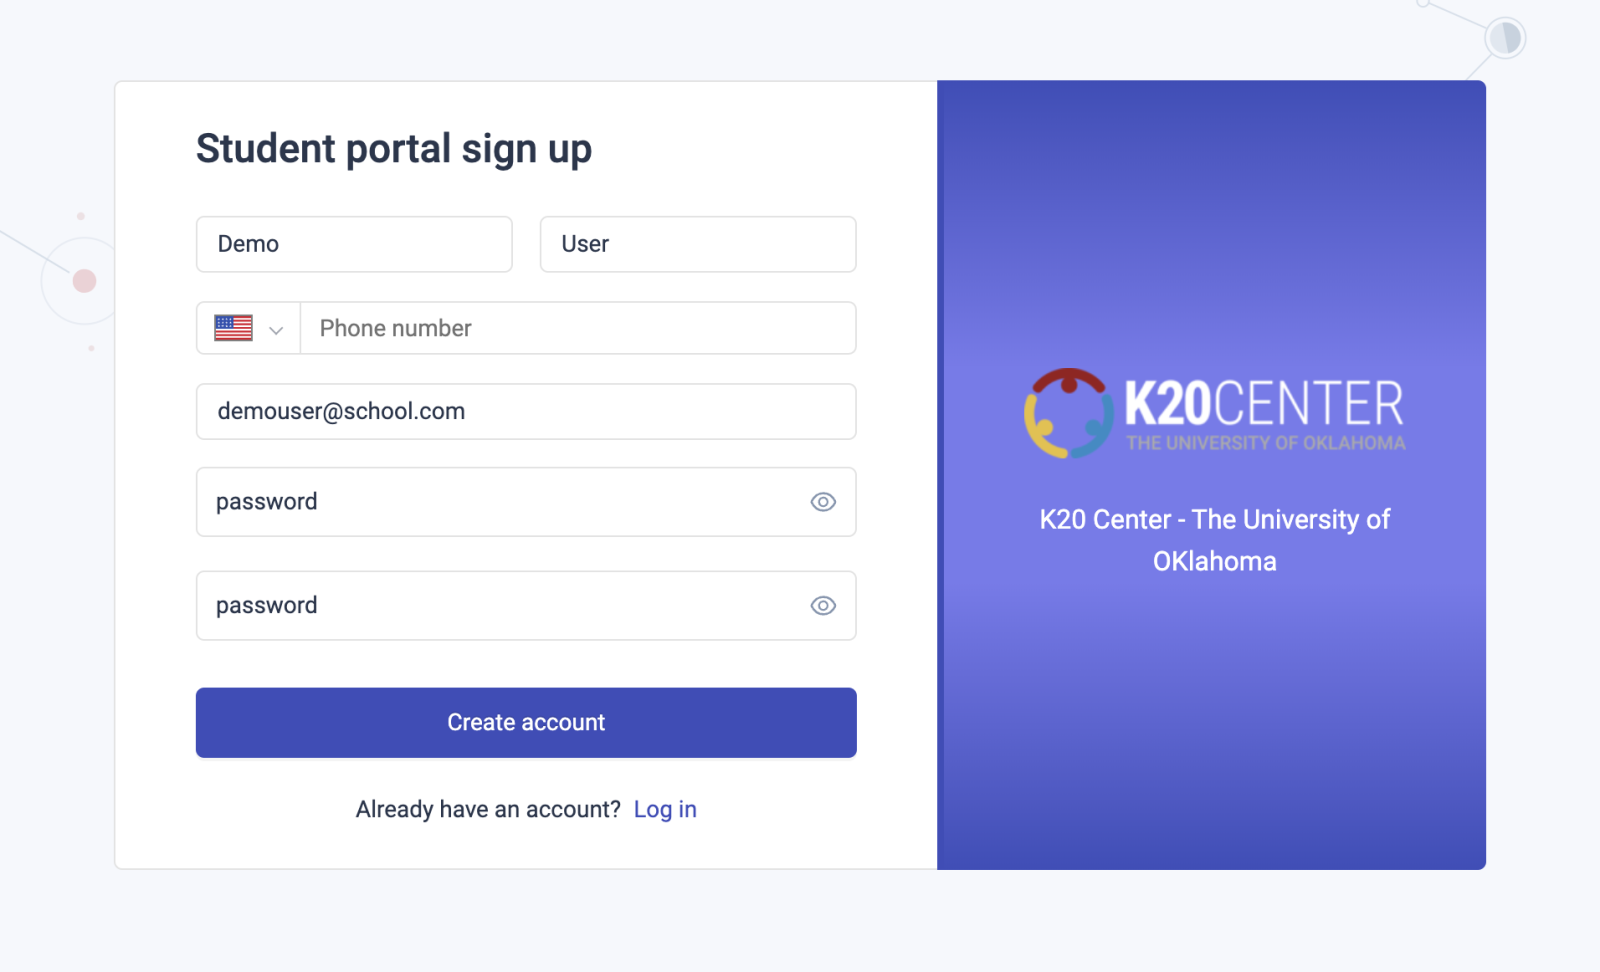 completed student portal sign up form